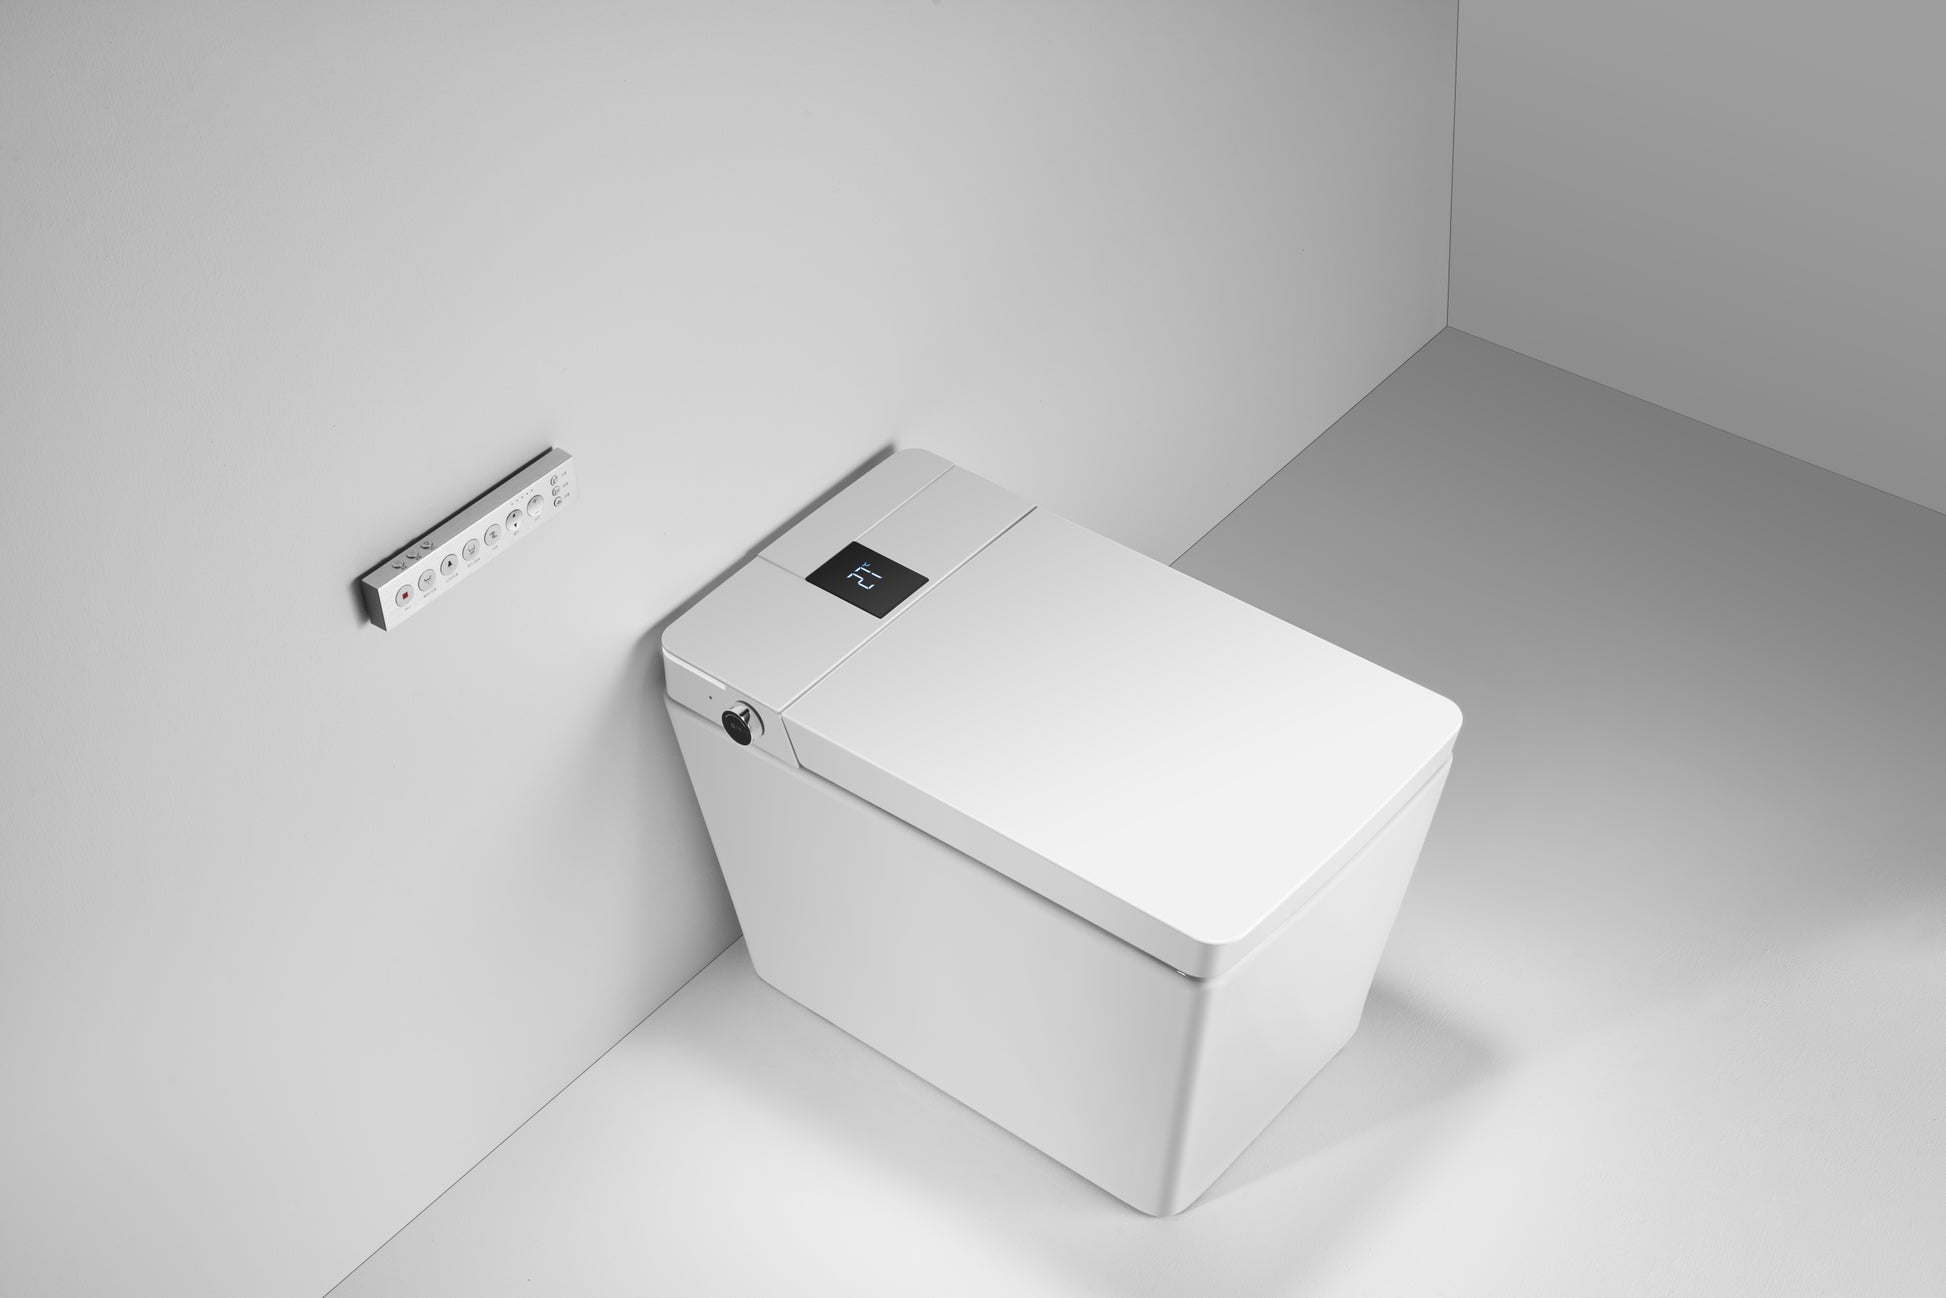 Multifunctional flat square smart toilet with white-ceramic